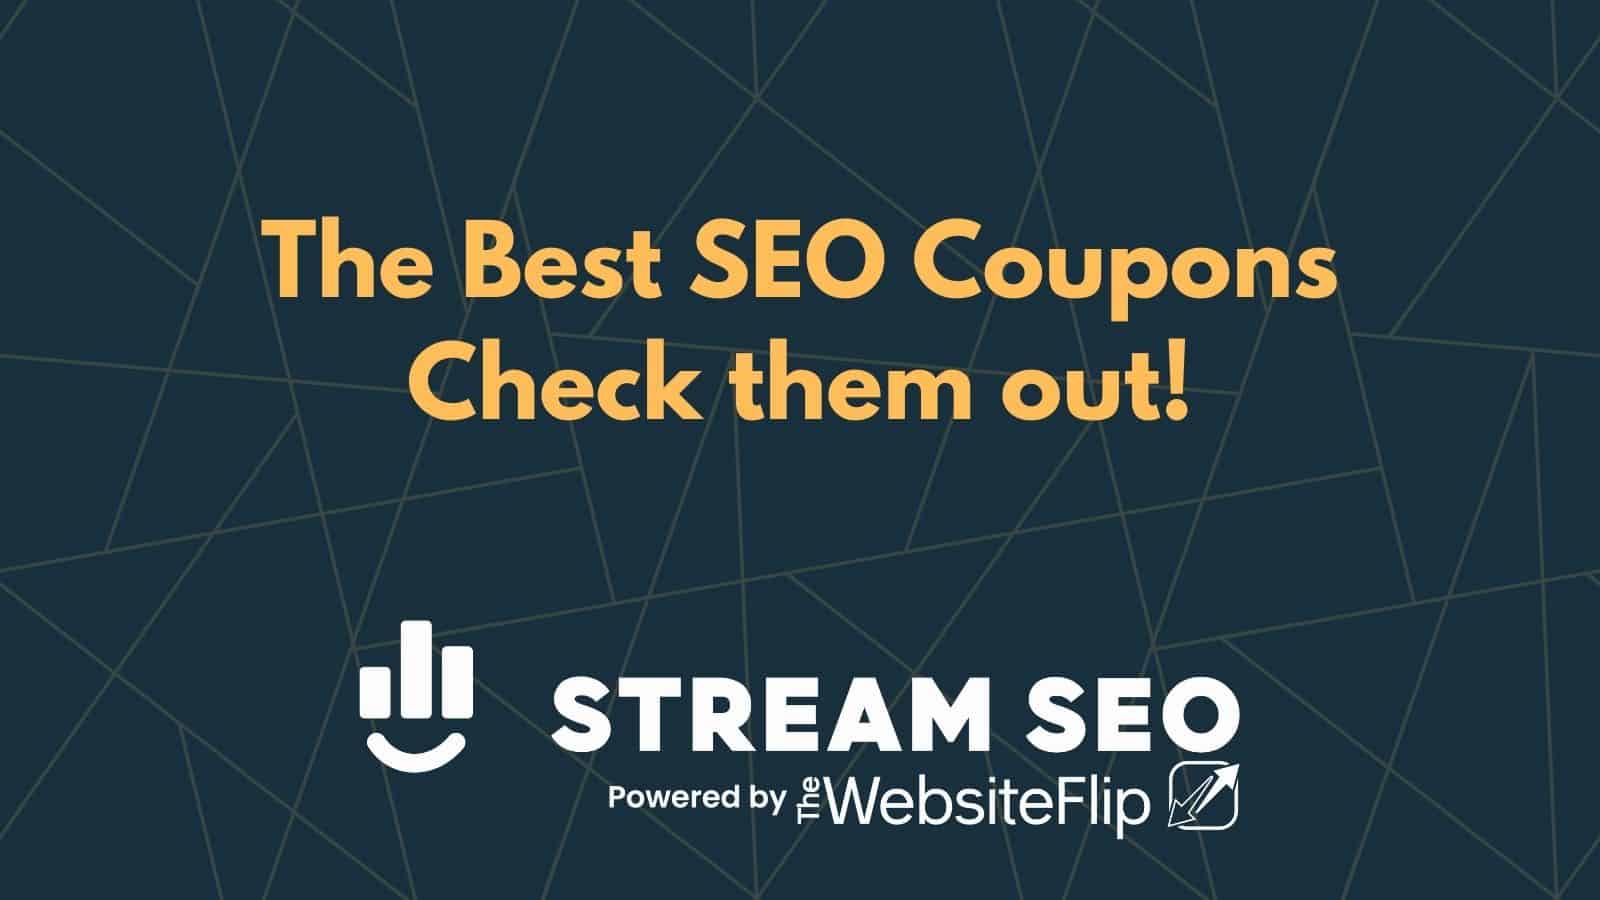 The Best SEO Coupons Of 2020 – Check them out!